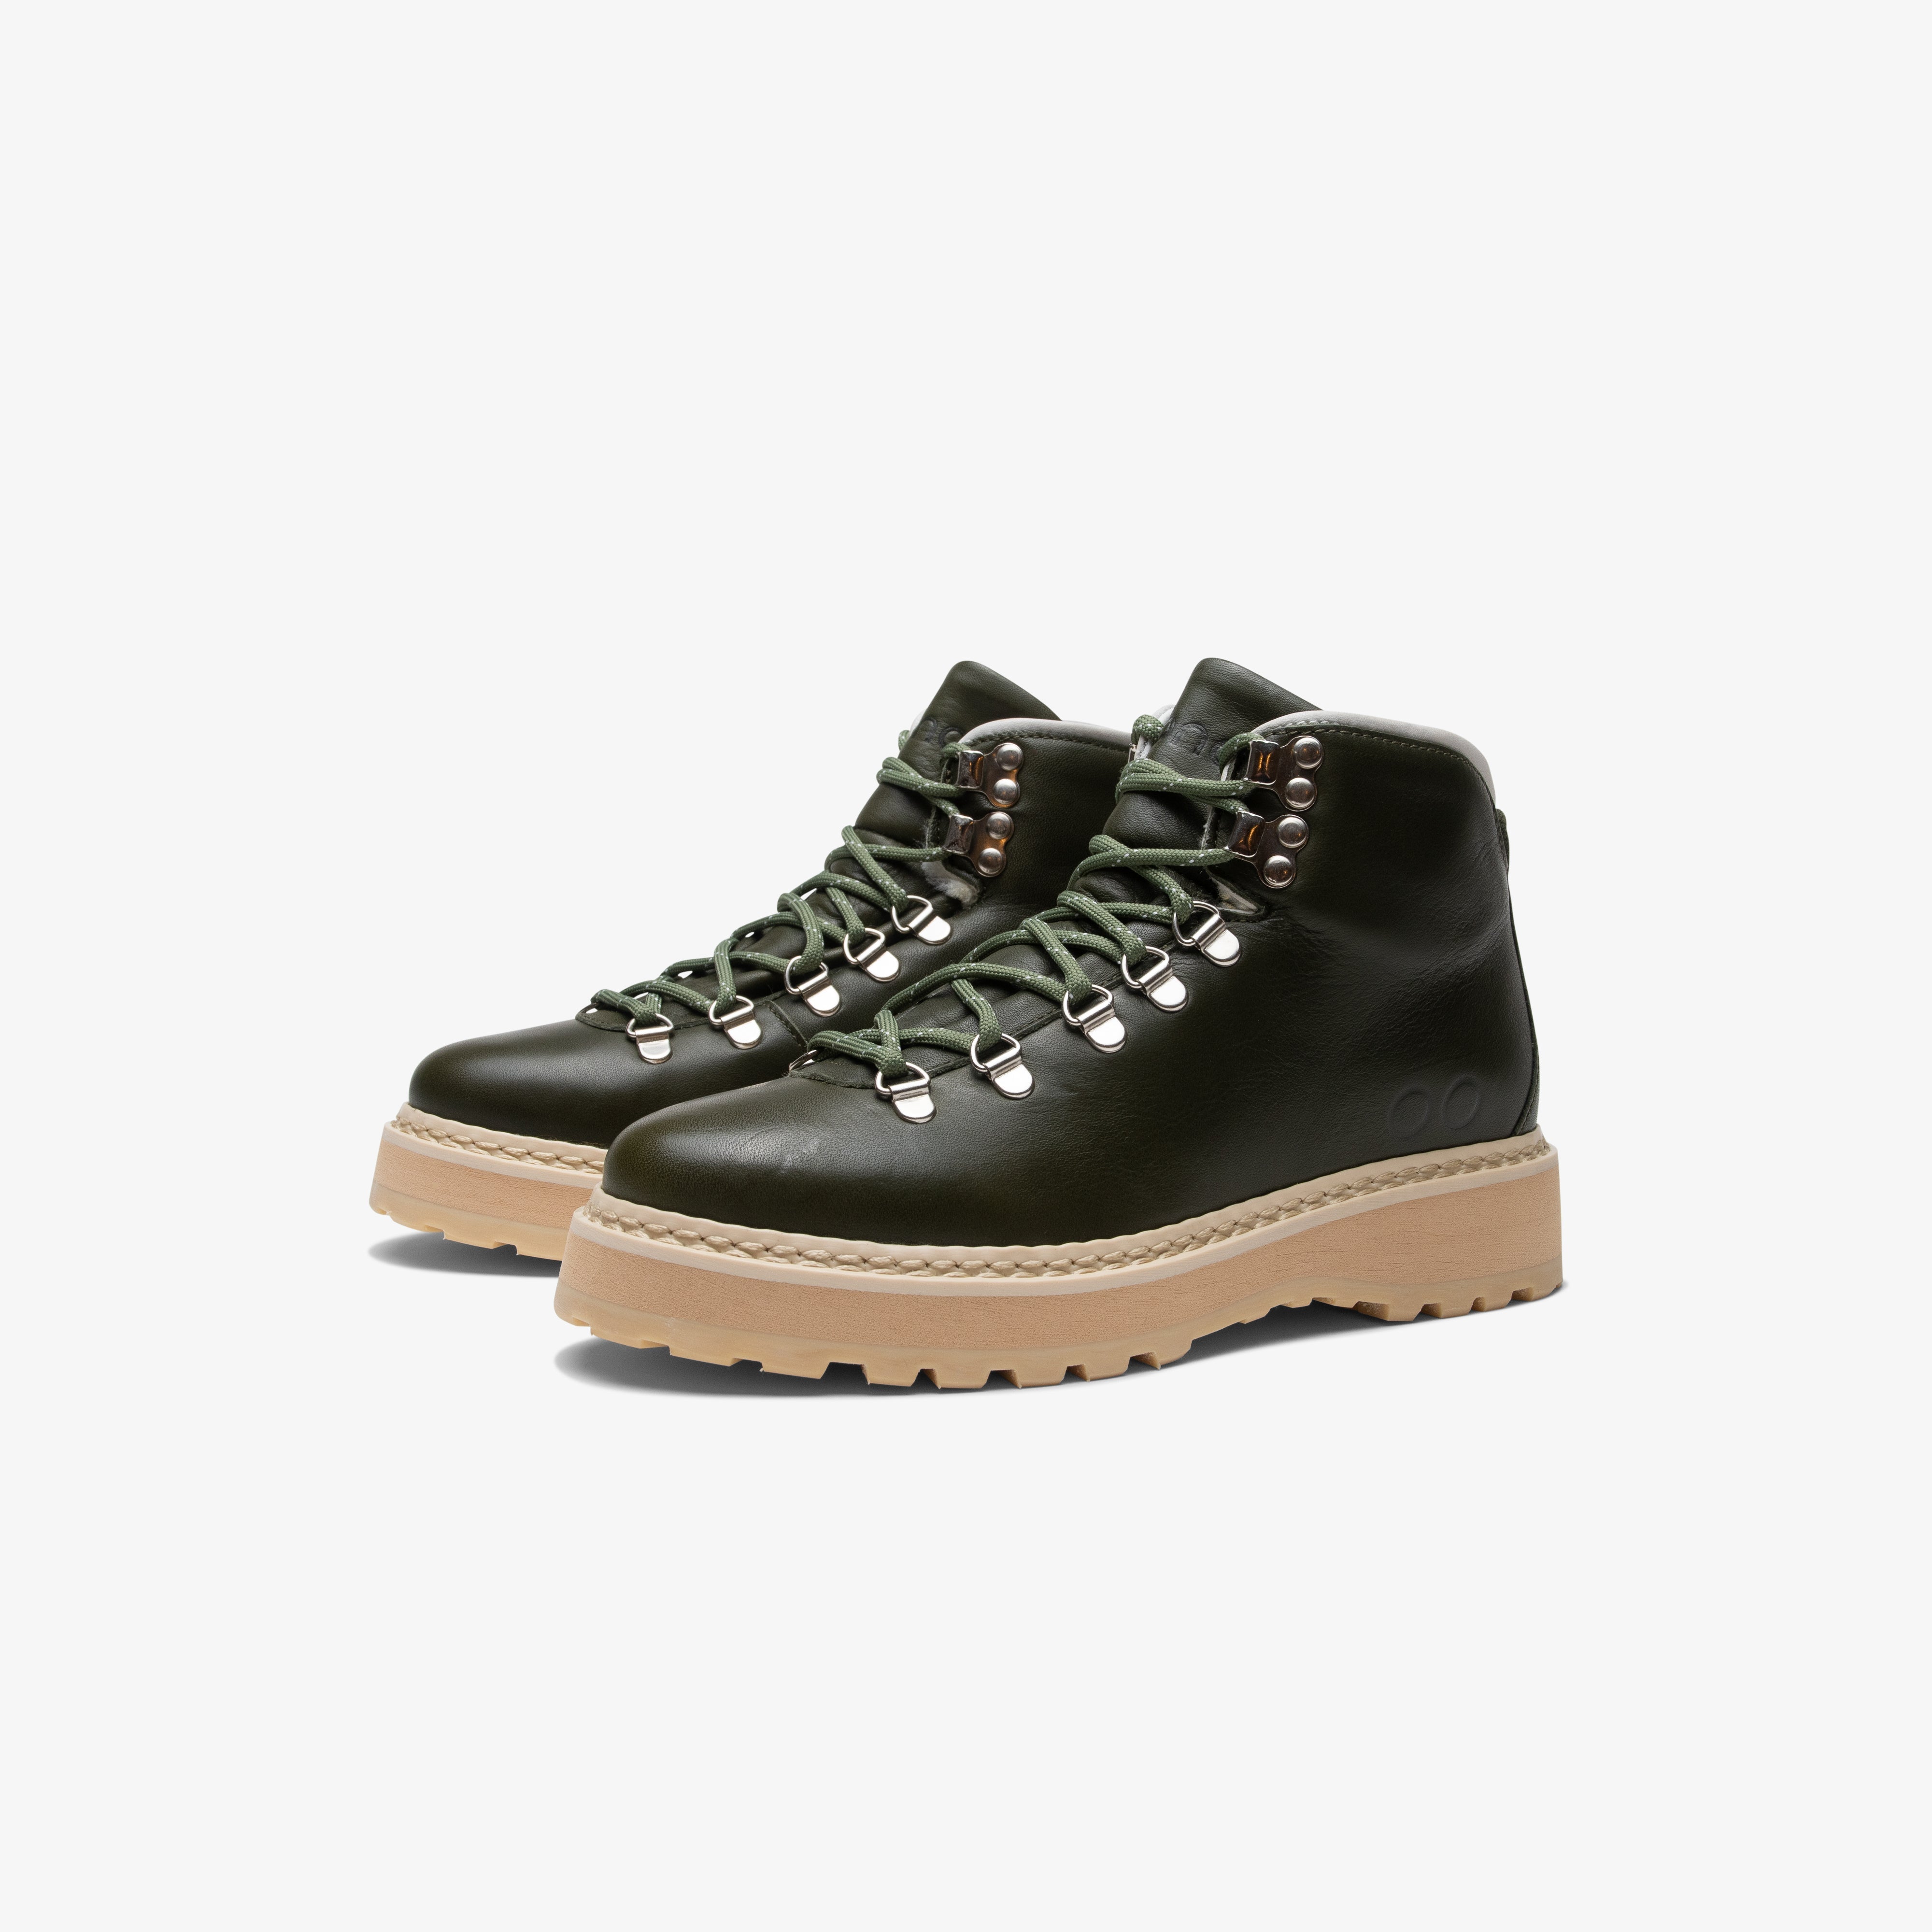 Hiking Core - Flat Leather - Shearling Lining - Mens